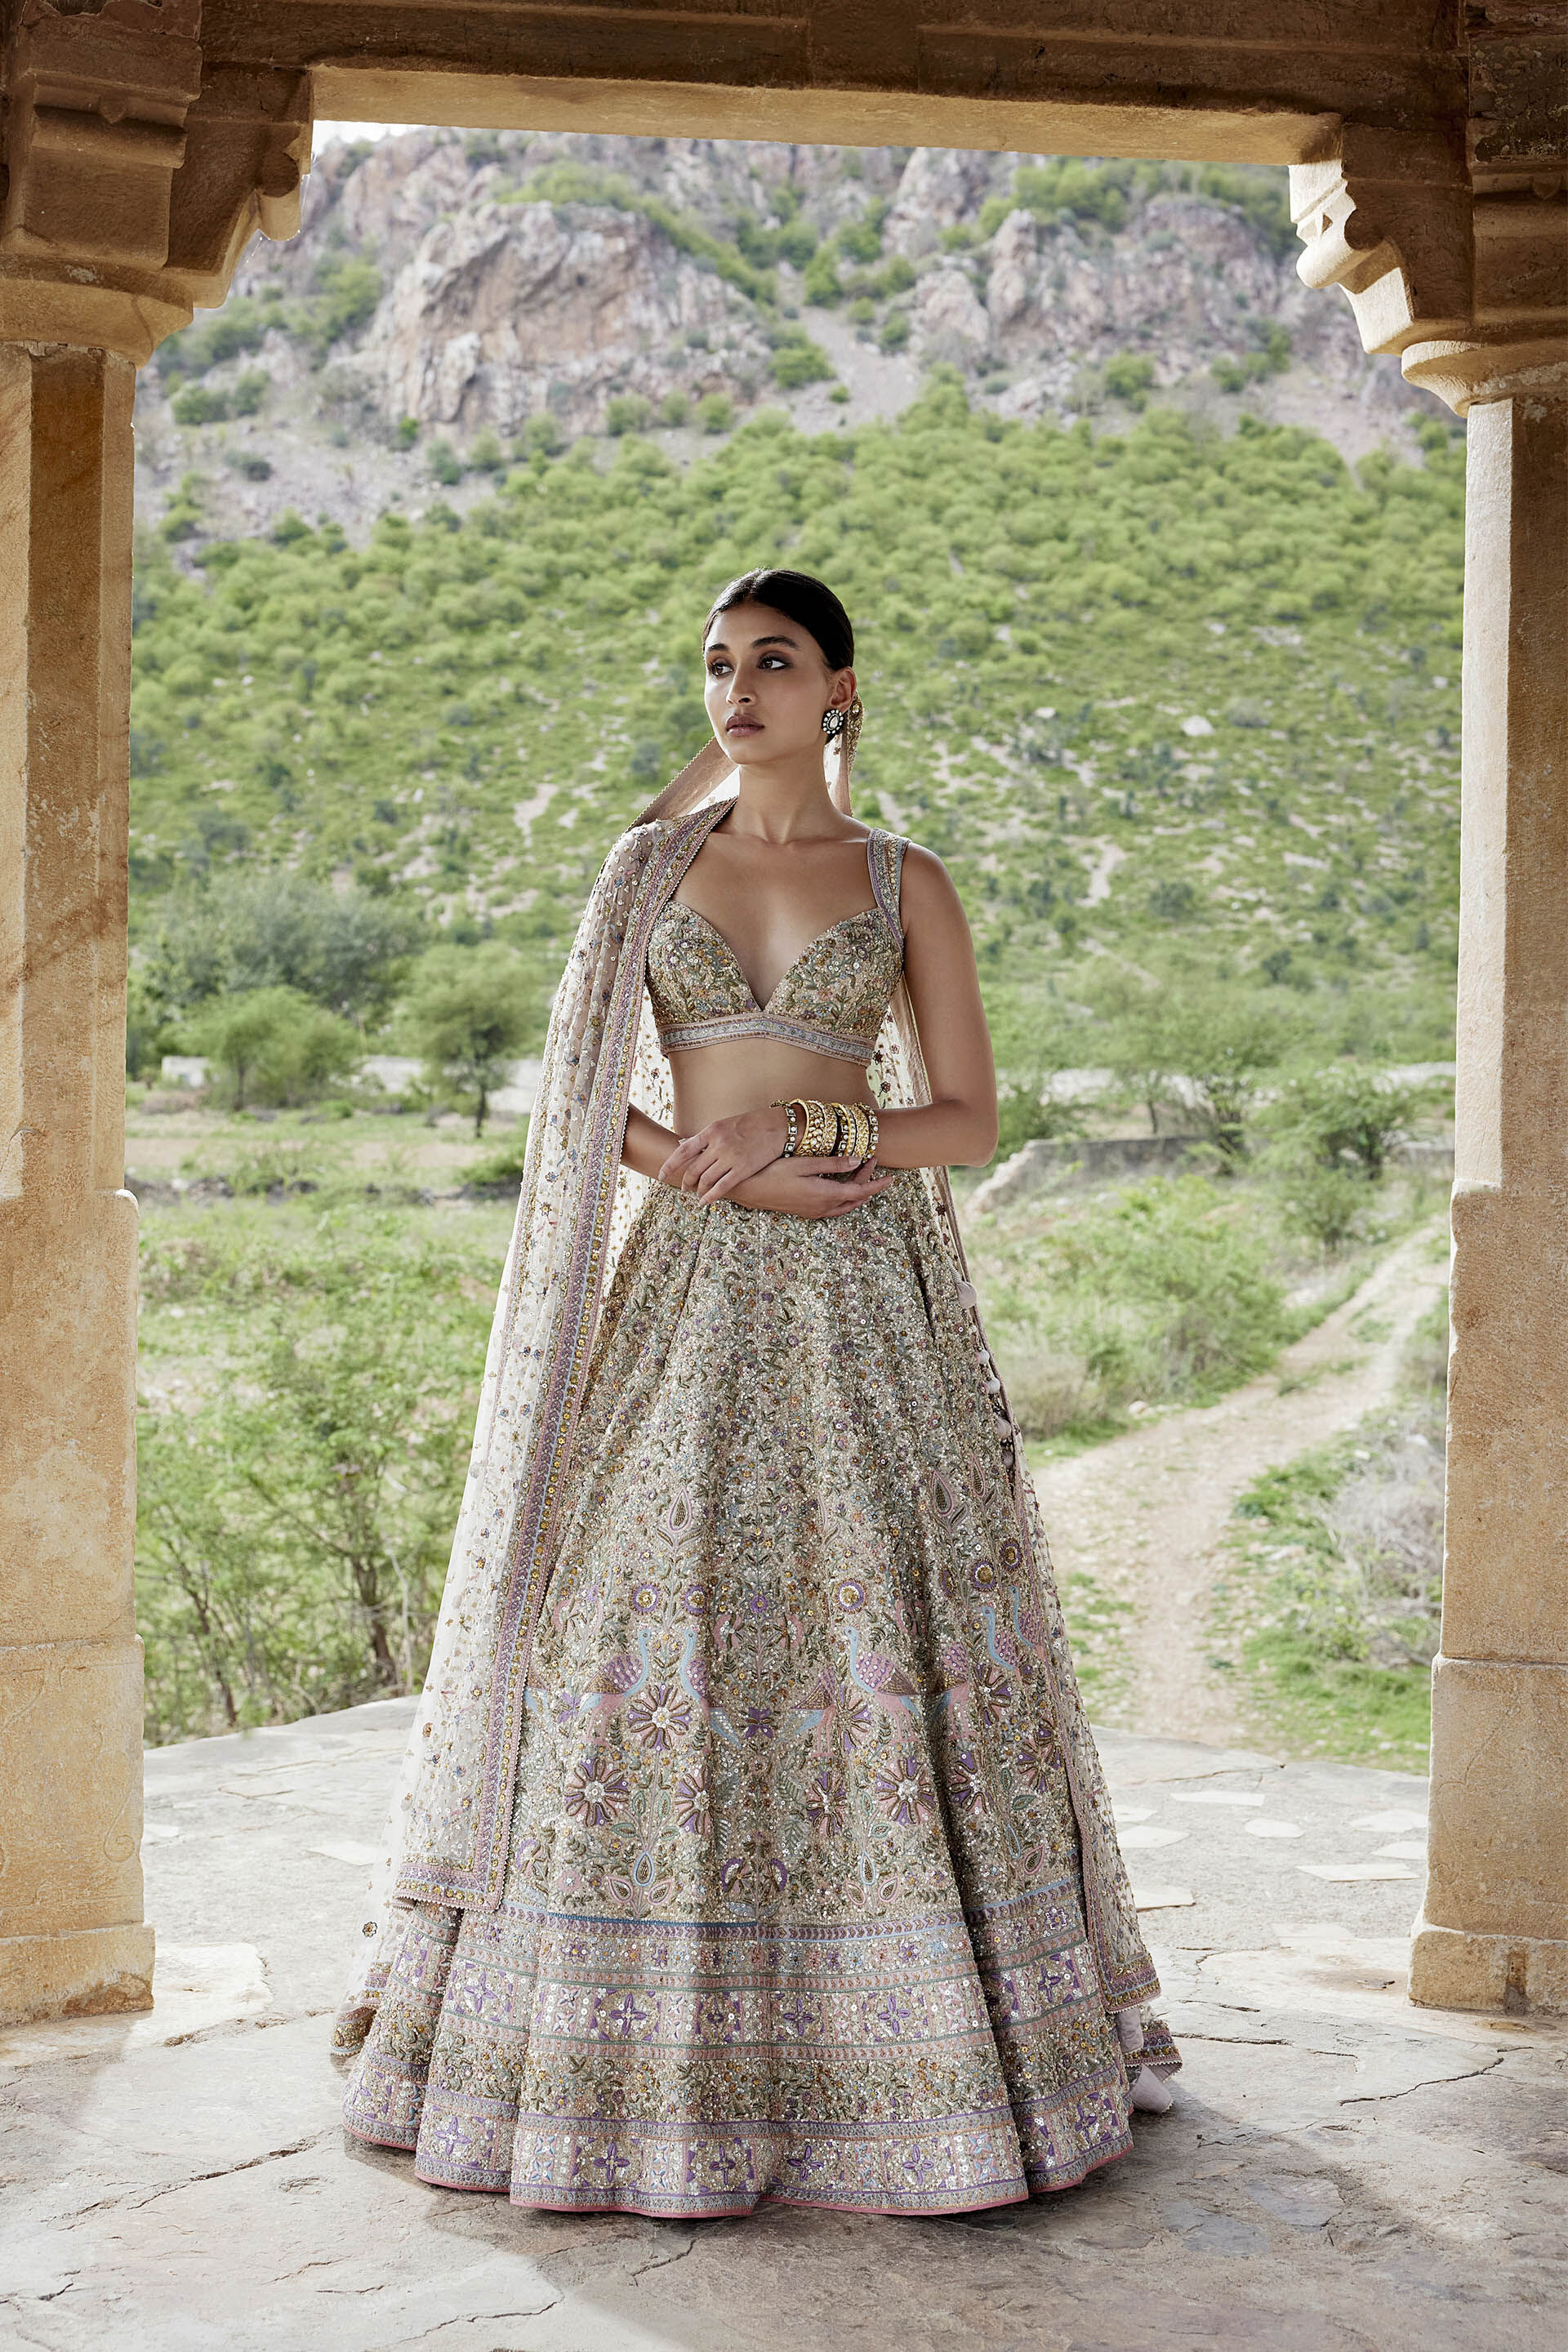 Designer Anita Dongre celebrates raw, regal and relatable brides with her Bridal  Couture 2021 collection ft muse Prajakta Koli